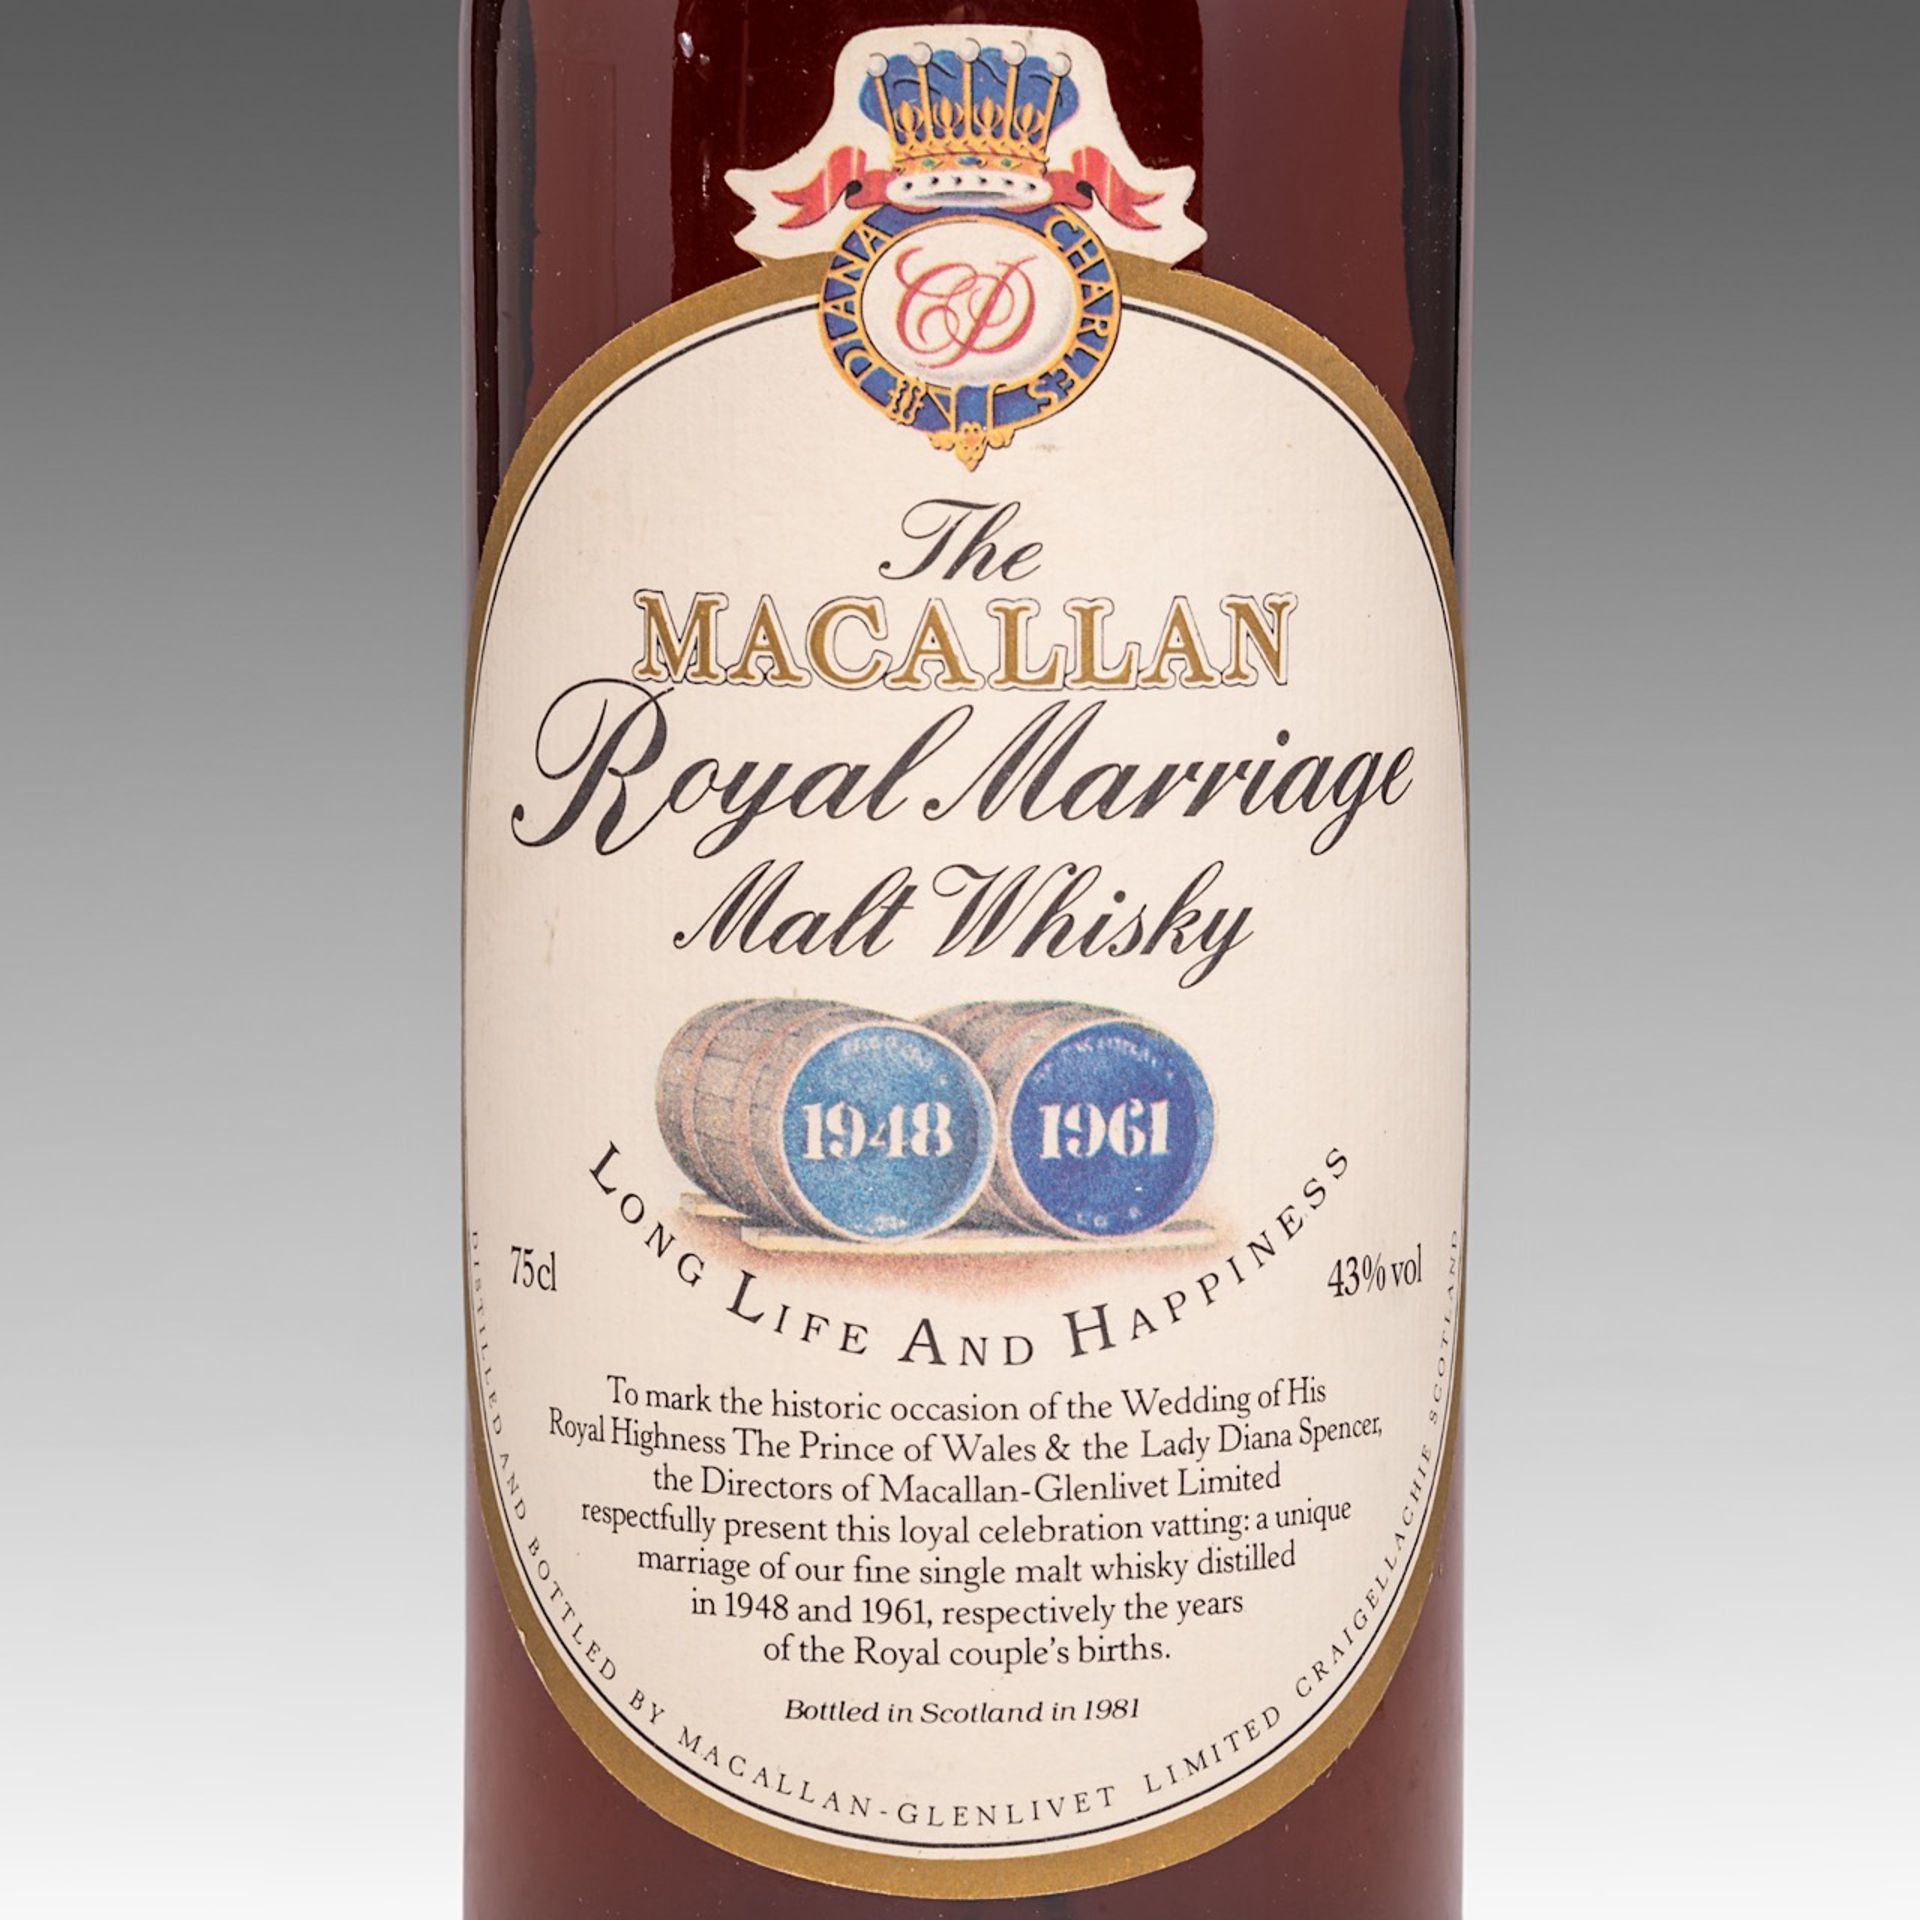 The Macallan Royal Marriage malt Whisky 1948 & 1961, bottled in Scotland in 1981 - Image 3 of 6